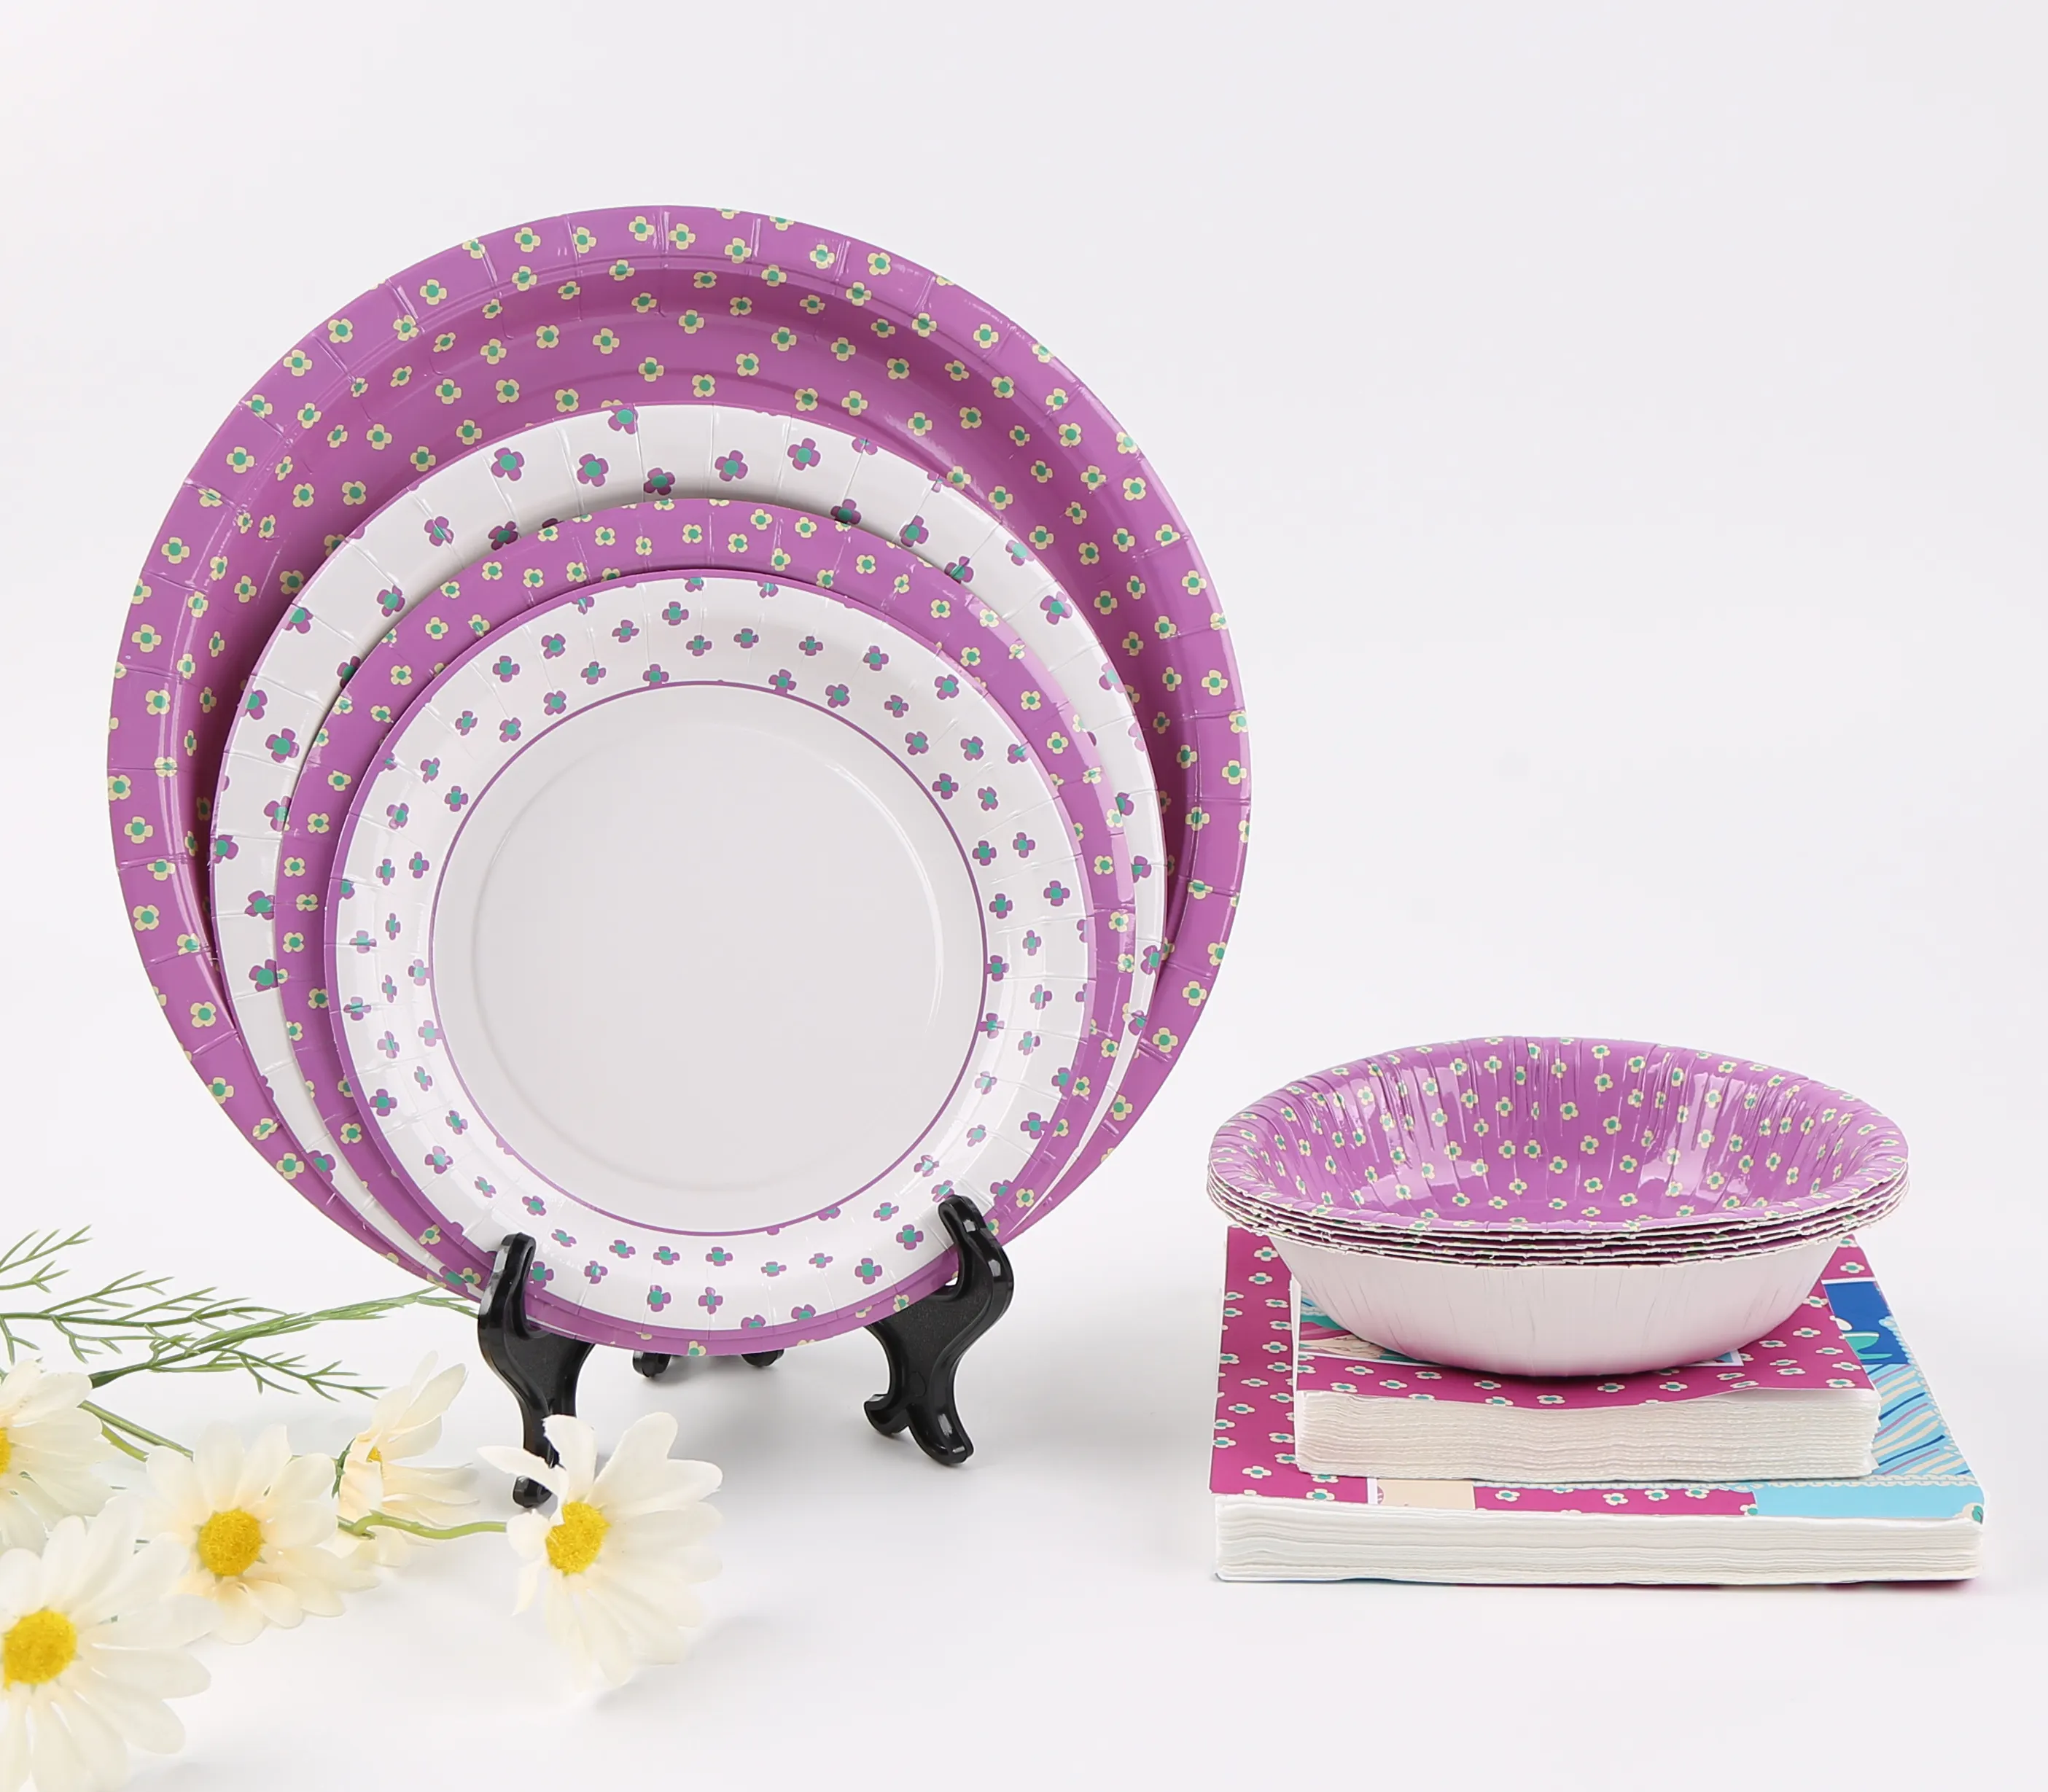 Popular Disposable Purple Bear Paper Plate Set Birthday Party Paper Plates Are Used For Festivals And Potluck Dinners